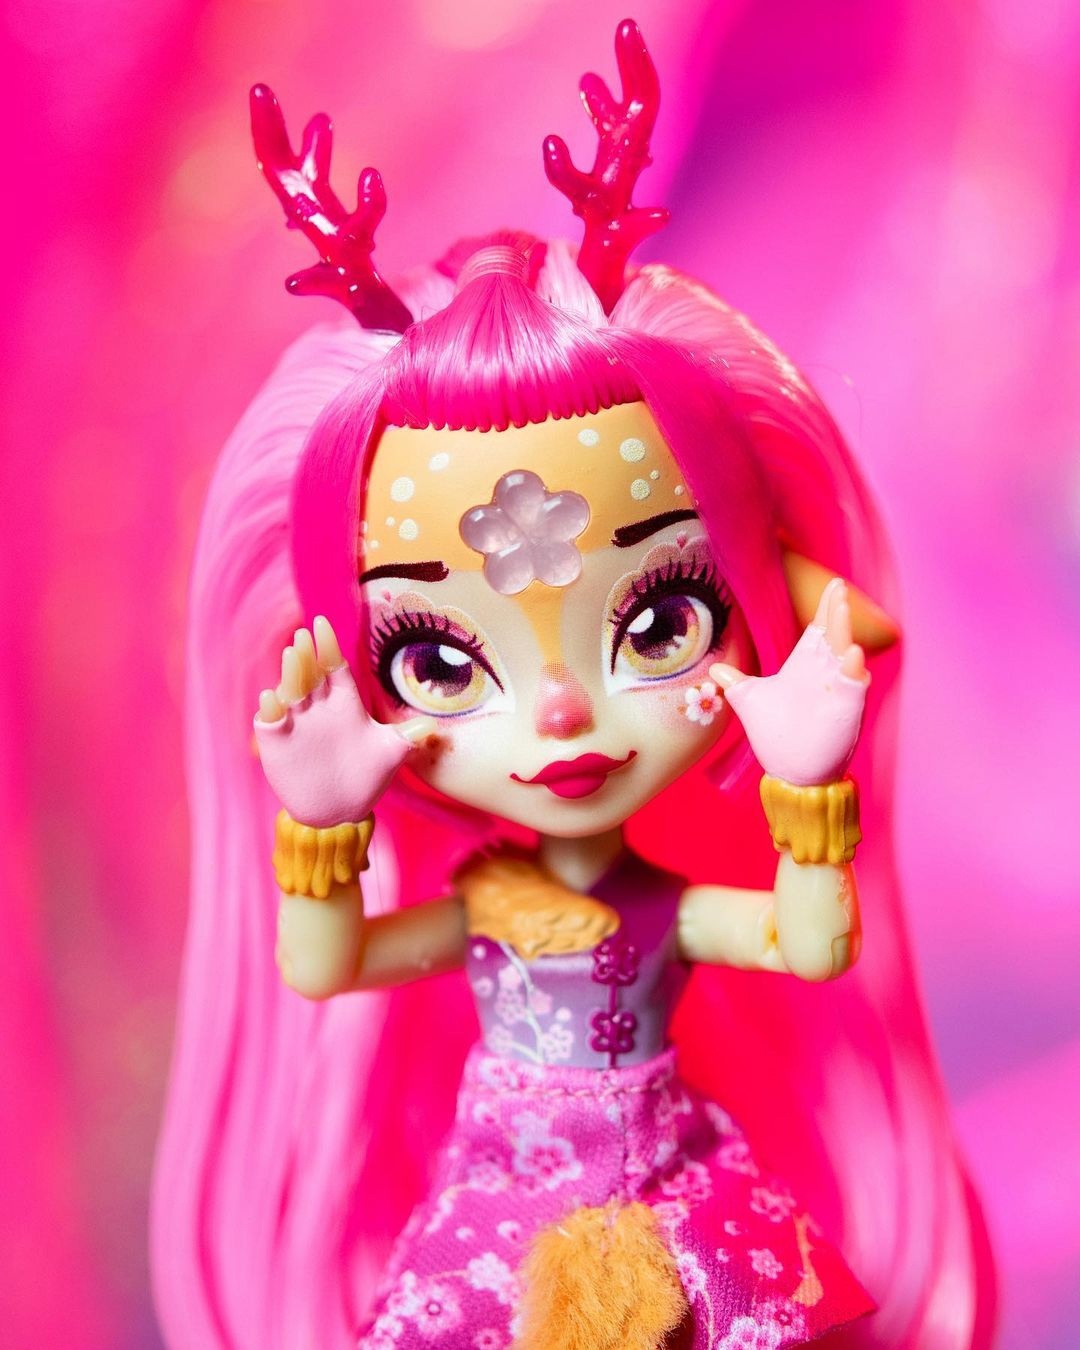 NEW Magic Mixies Pixlings (Doll) - Hot NEW Toy EXCLUSIVE Flitta In Hand  Early